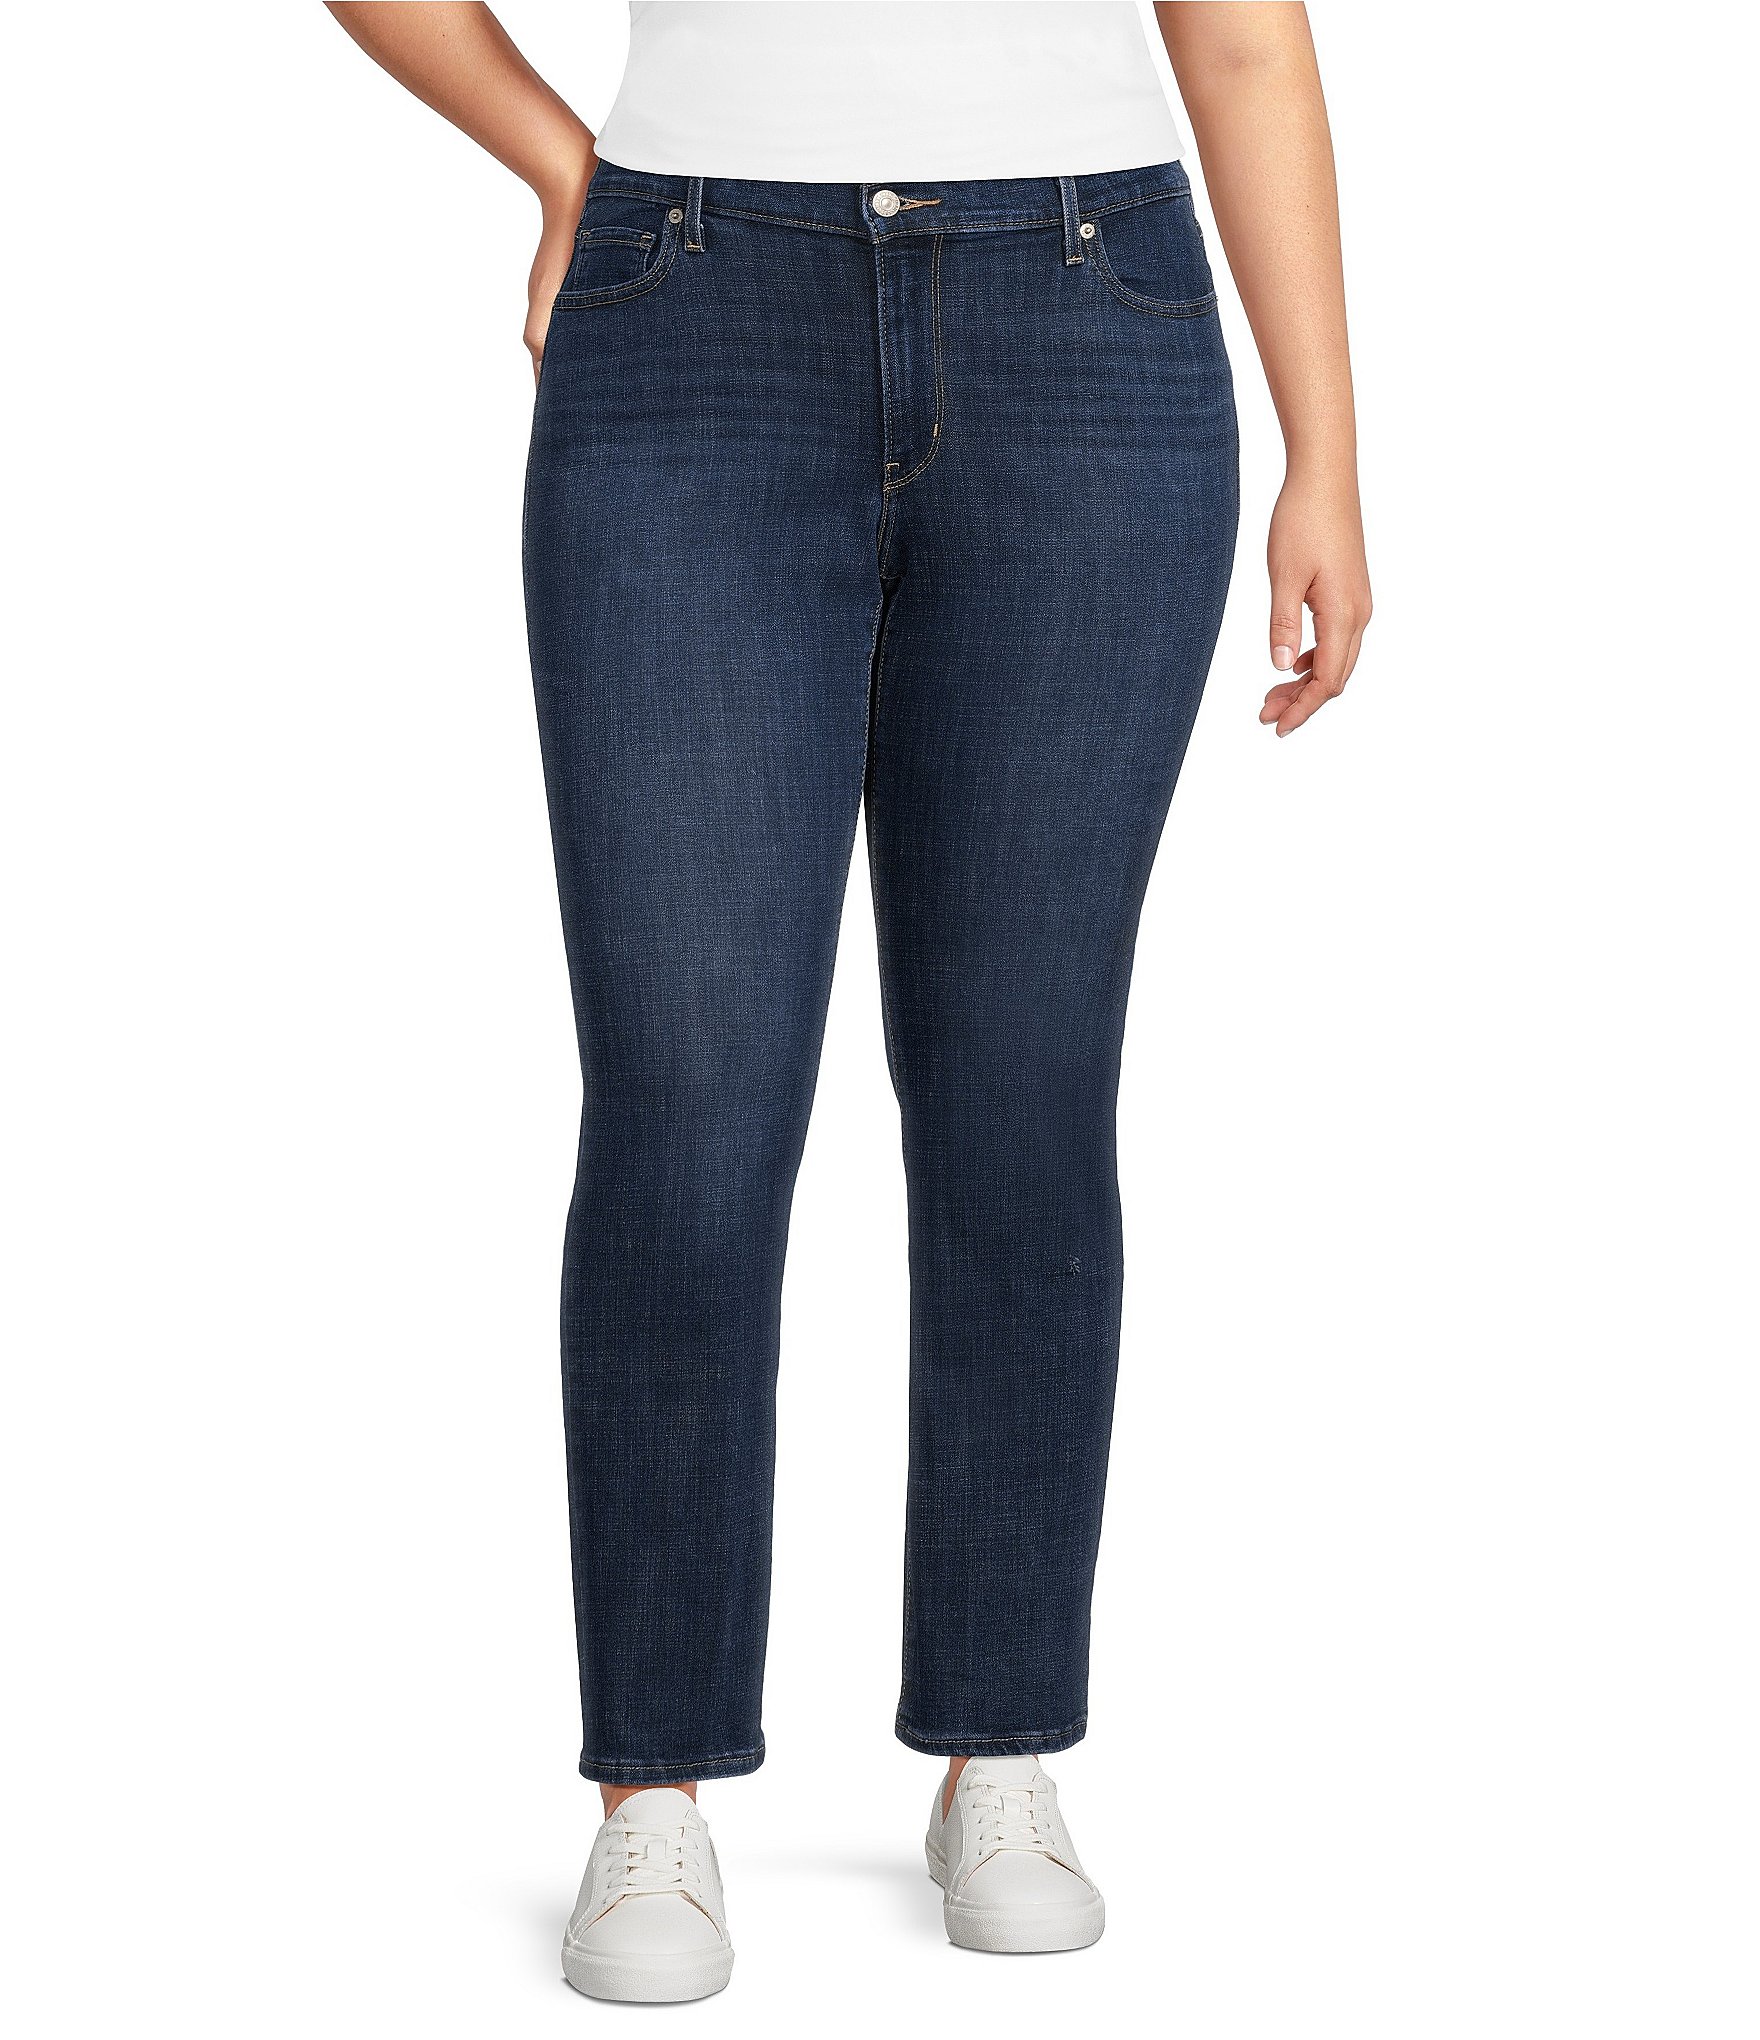  Levis Womens Plus-size 414 Classic Straight Jeans, Maui  Waterfall